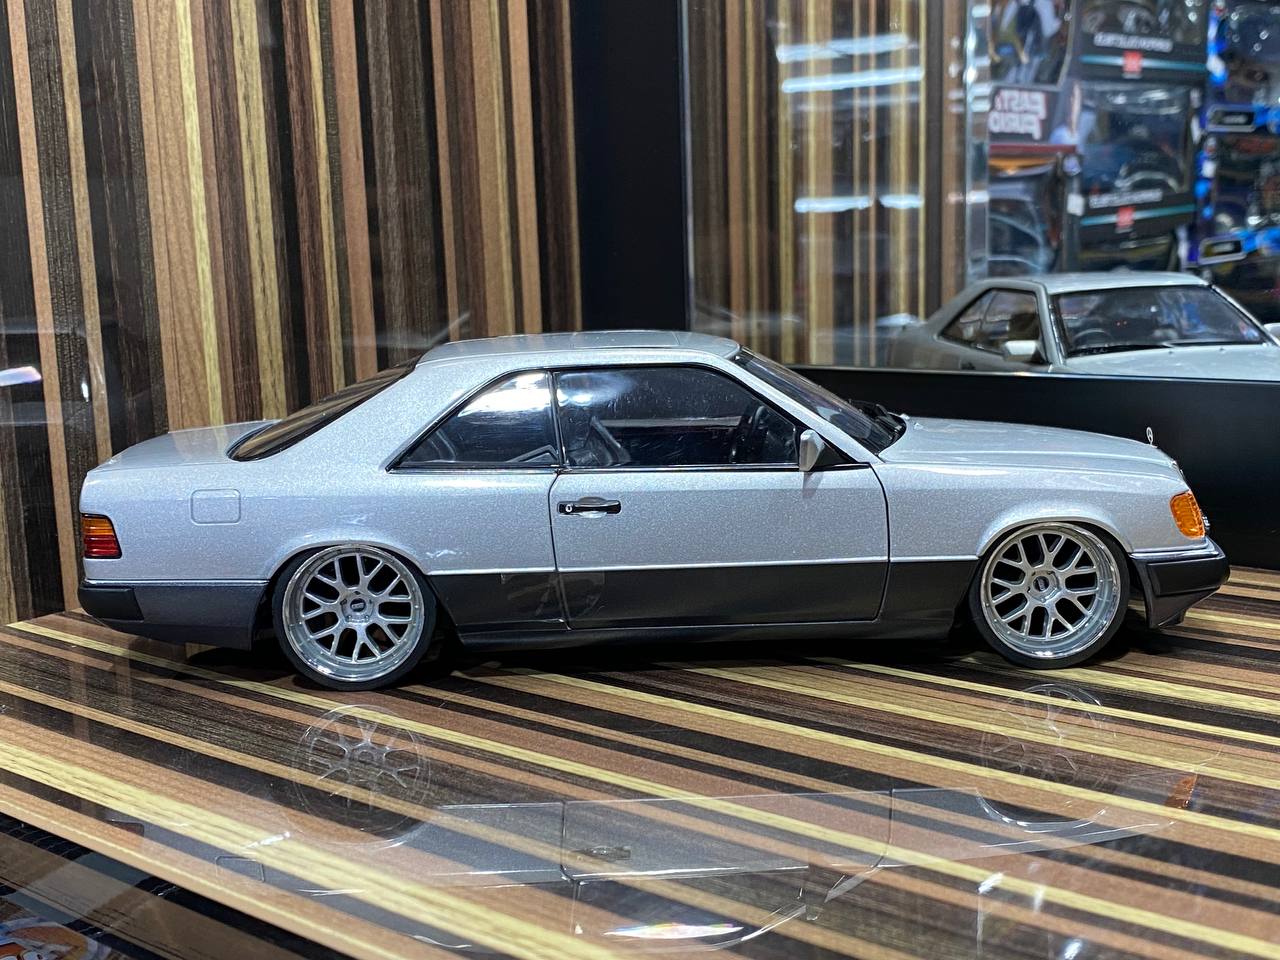 1/18 Diecast Mercedes-Benz 300 CE-24 Coupe Silver Norev Scale Model Car